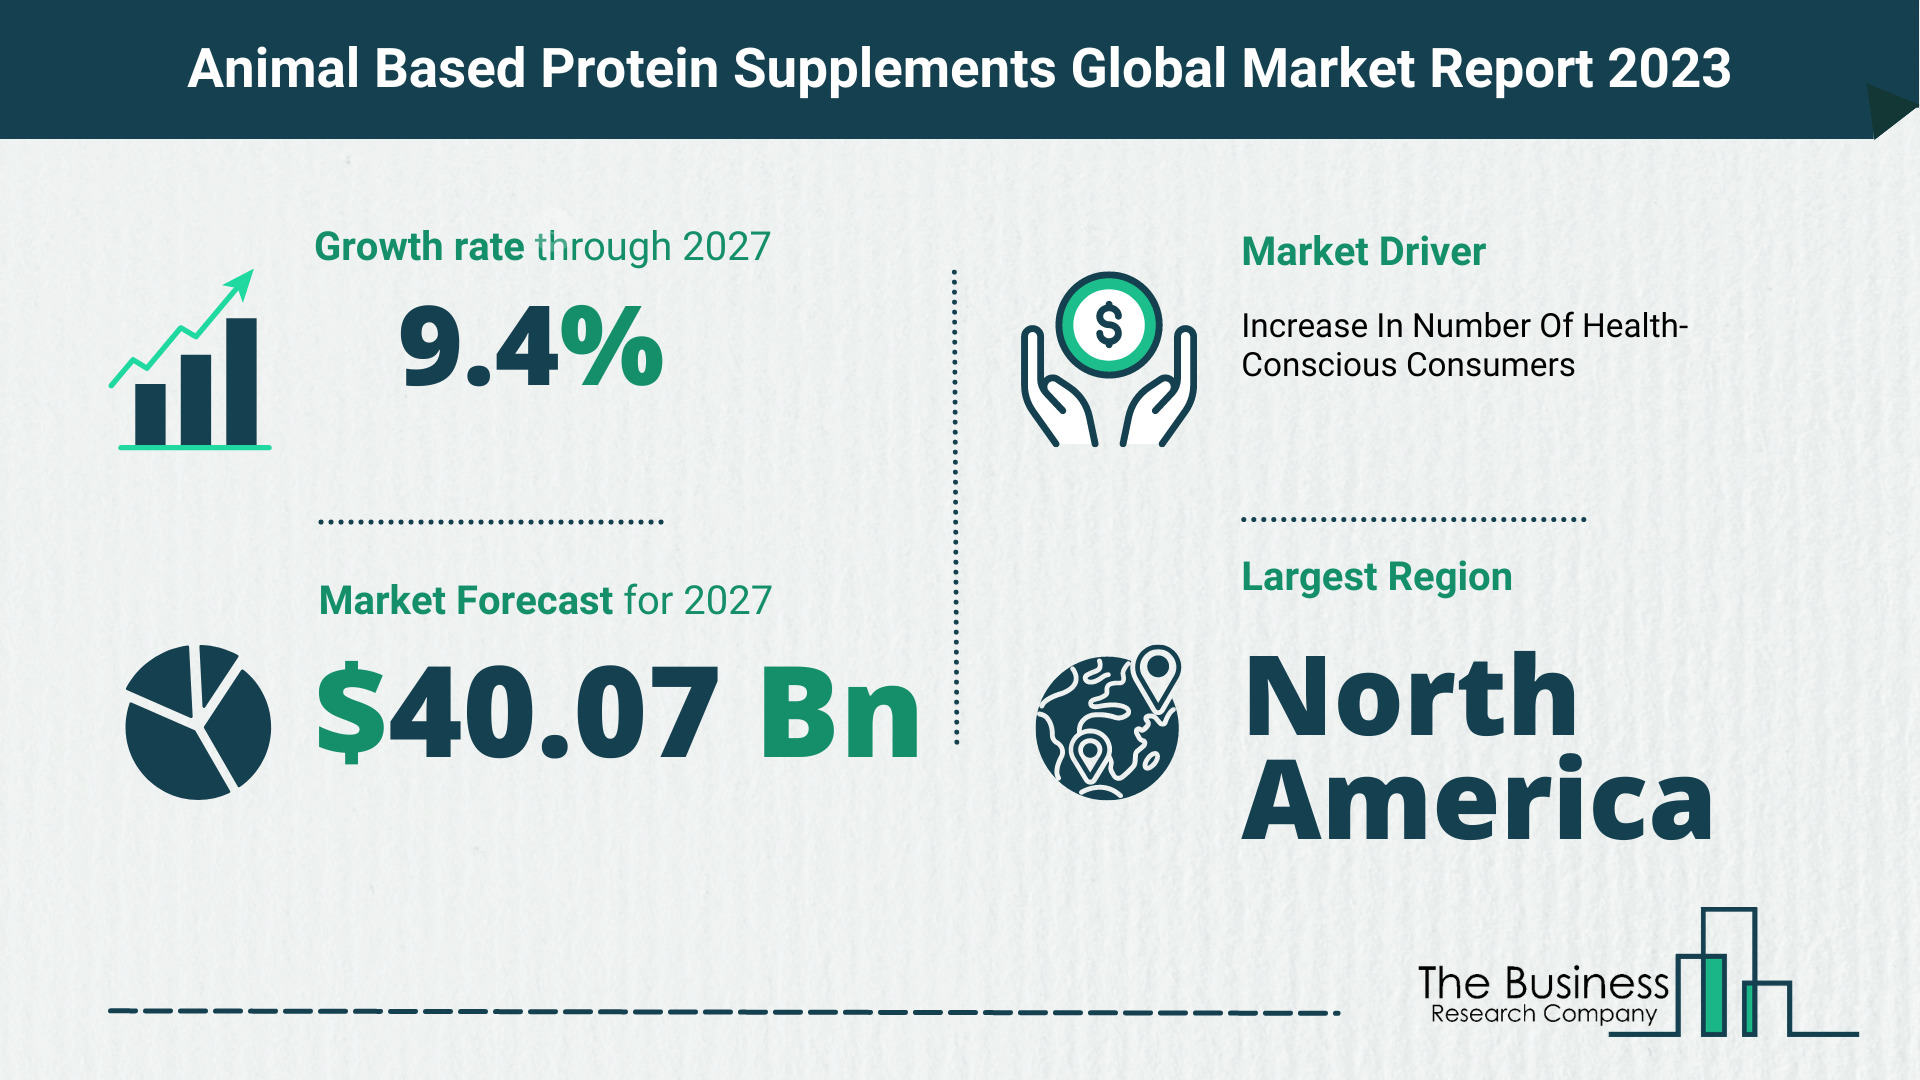 How Will The Animal Based Protein Supplements Market Globally Expand In 2023?